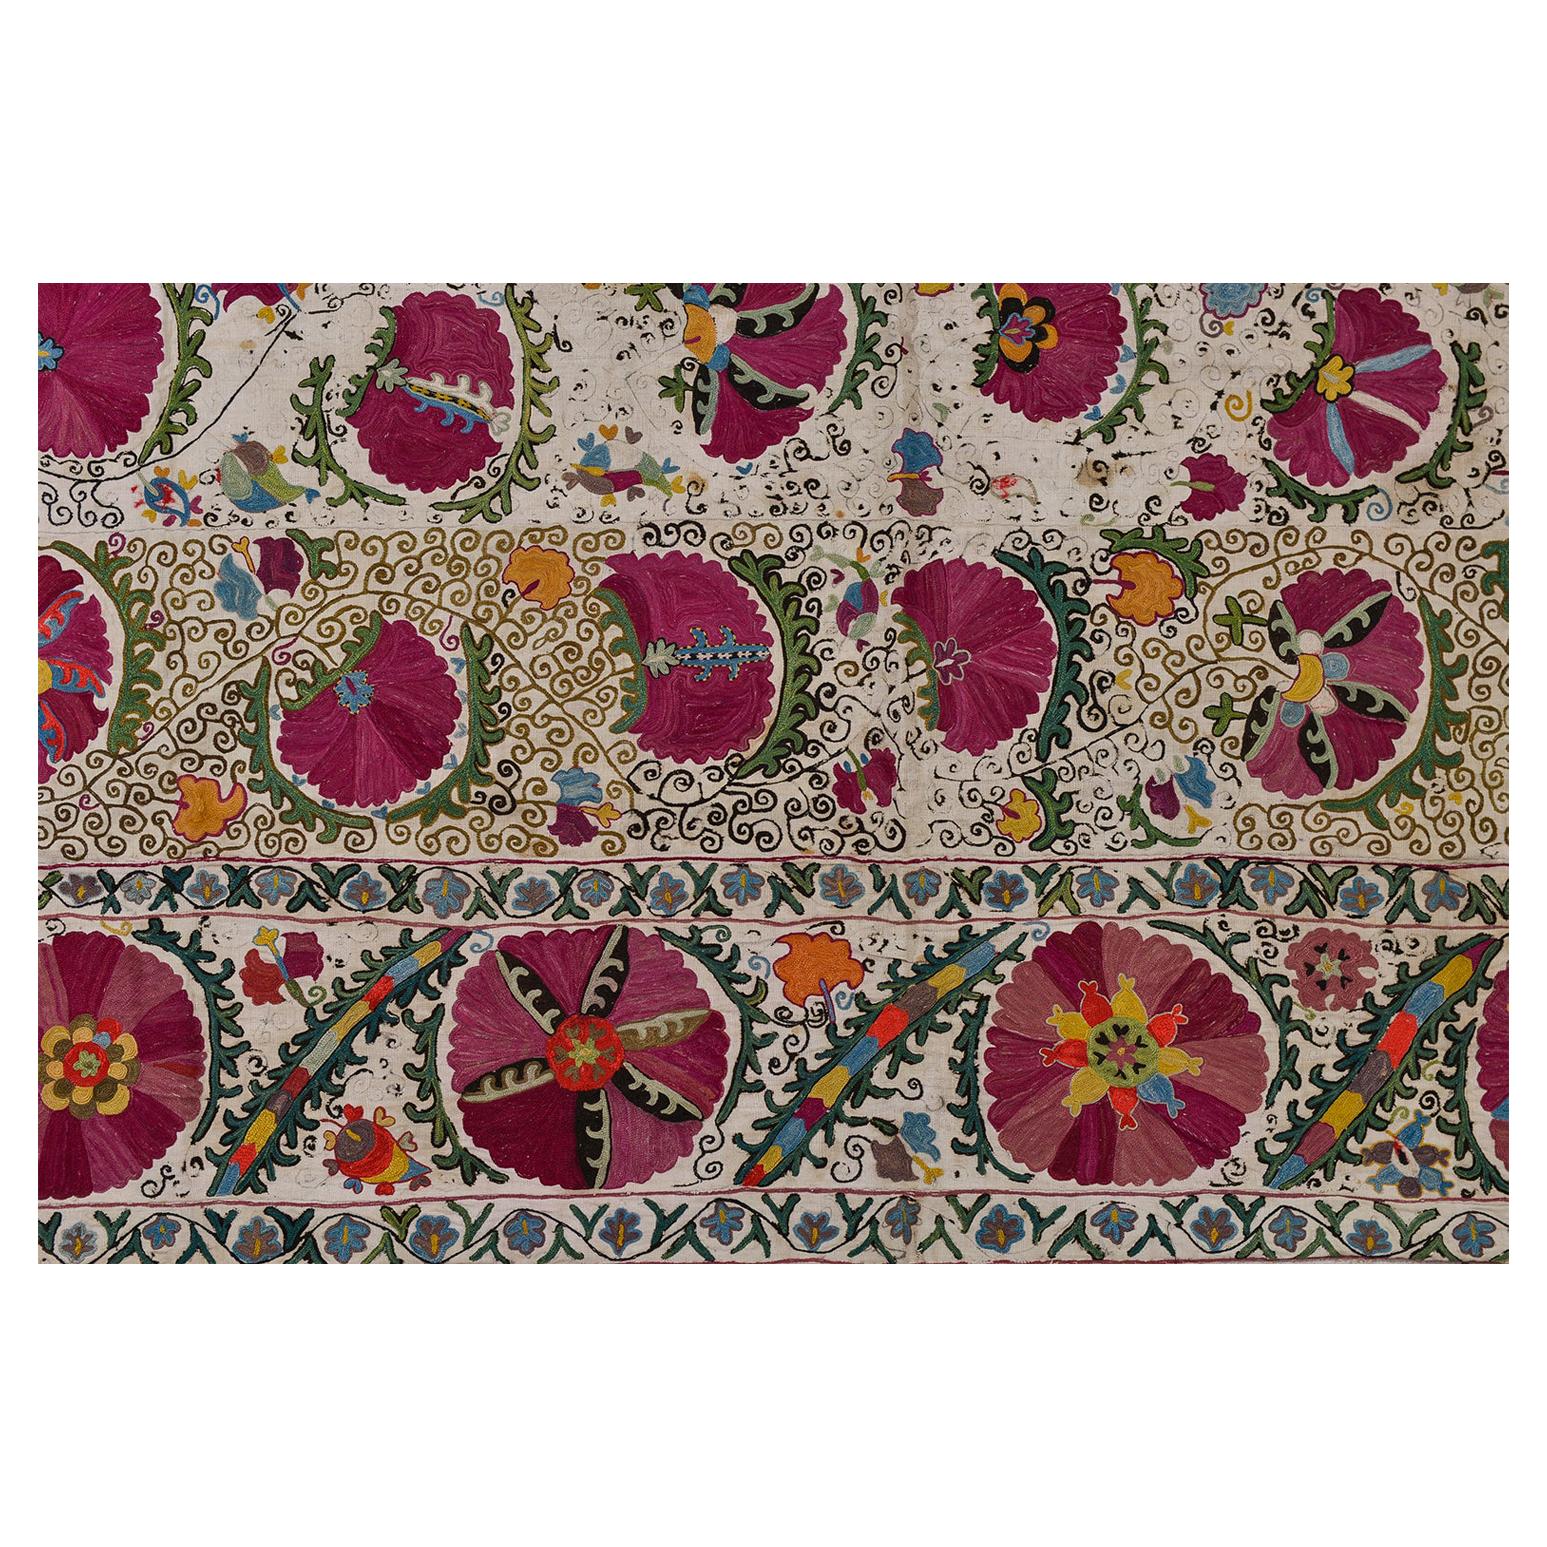  Rare Silk Embroidered Antique Suzani from Private Collection For Sale